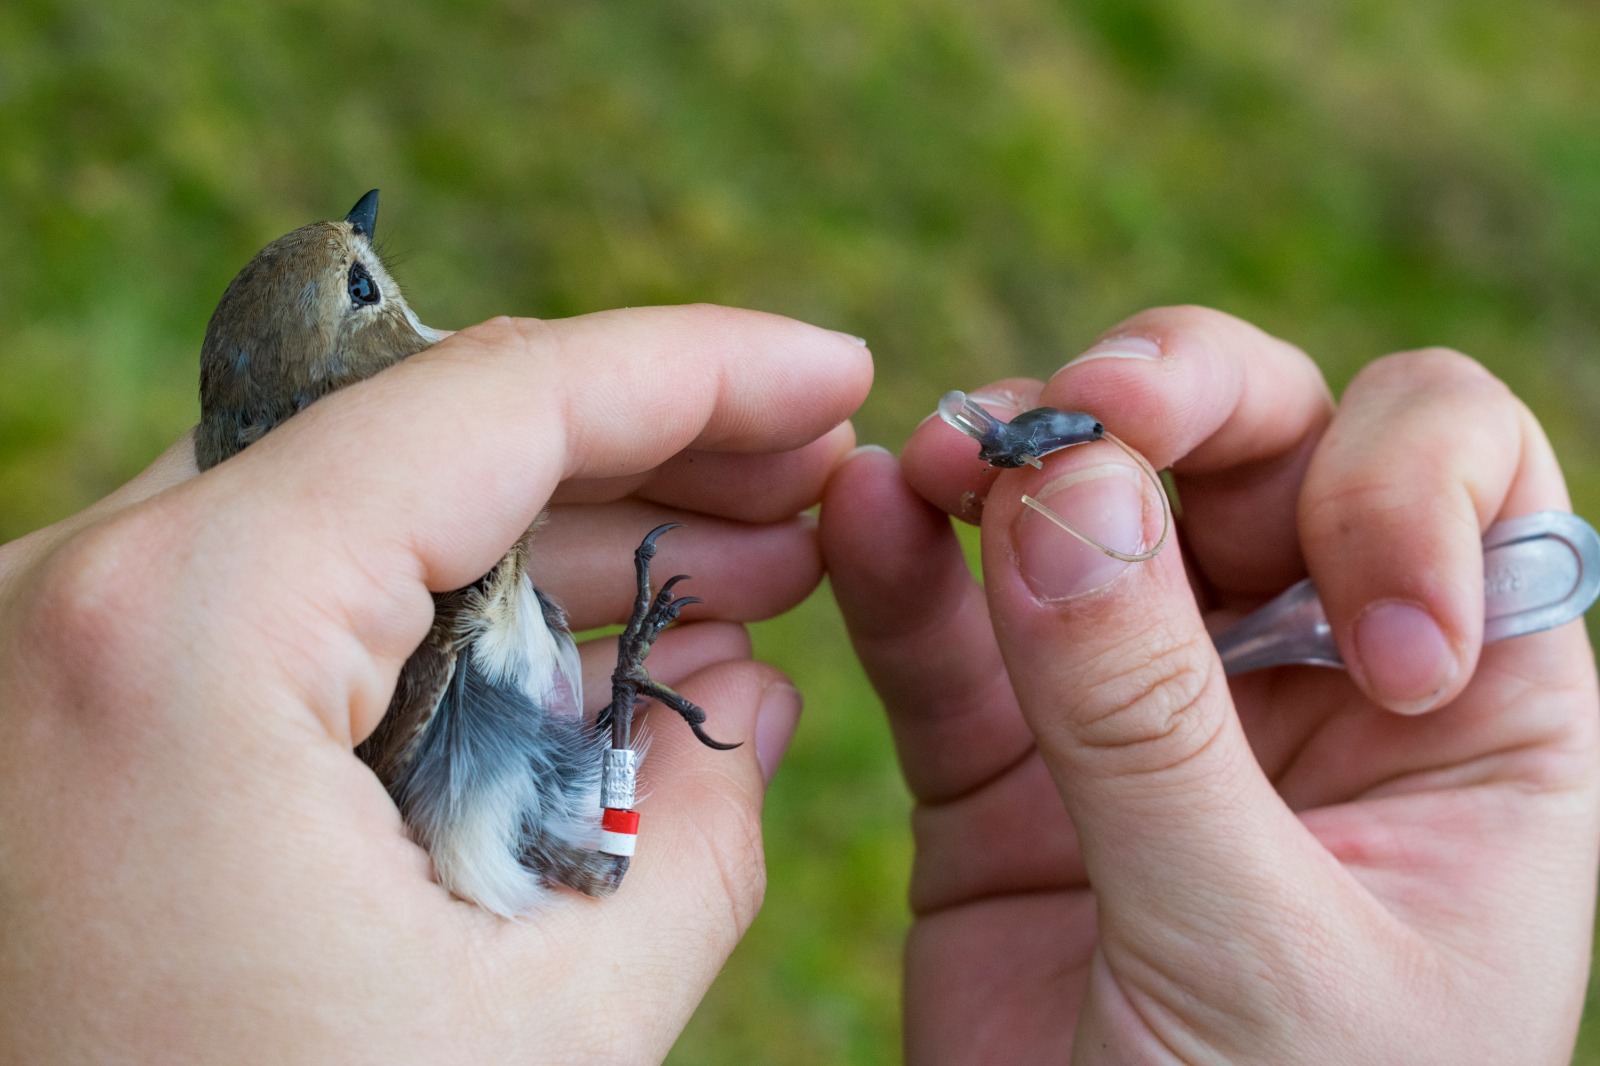 A researcher prepares to outfit a flycatcher with a backpack tracker, weighing less than half a gram. Photo credit: Koosje Lamers